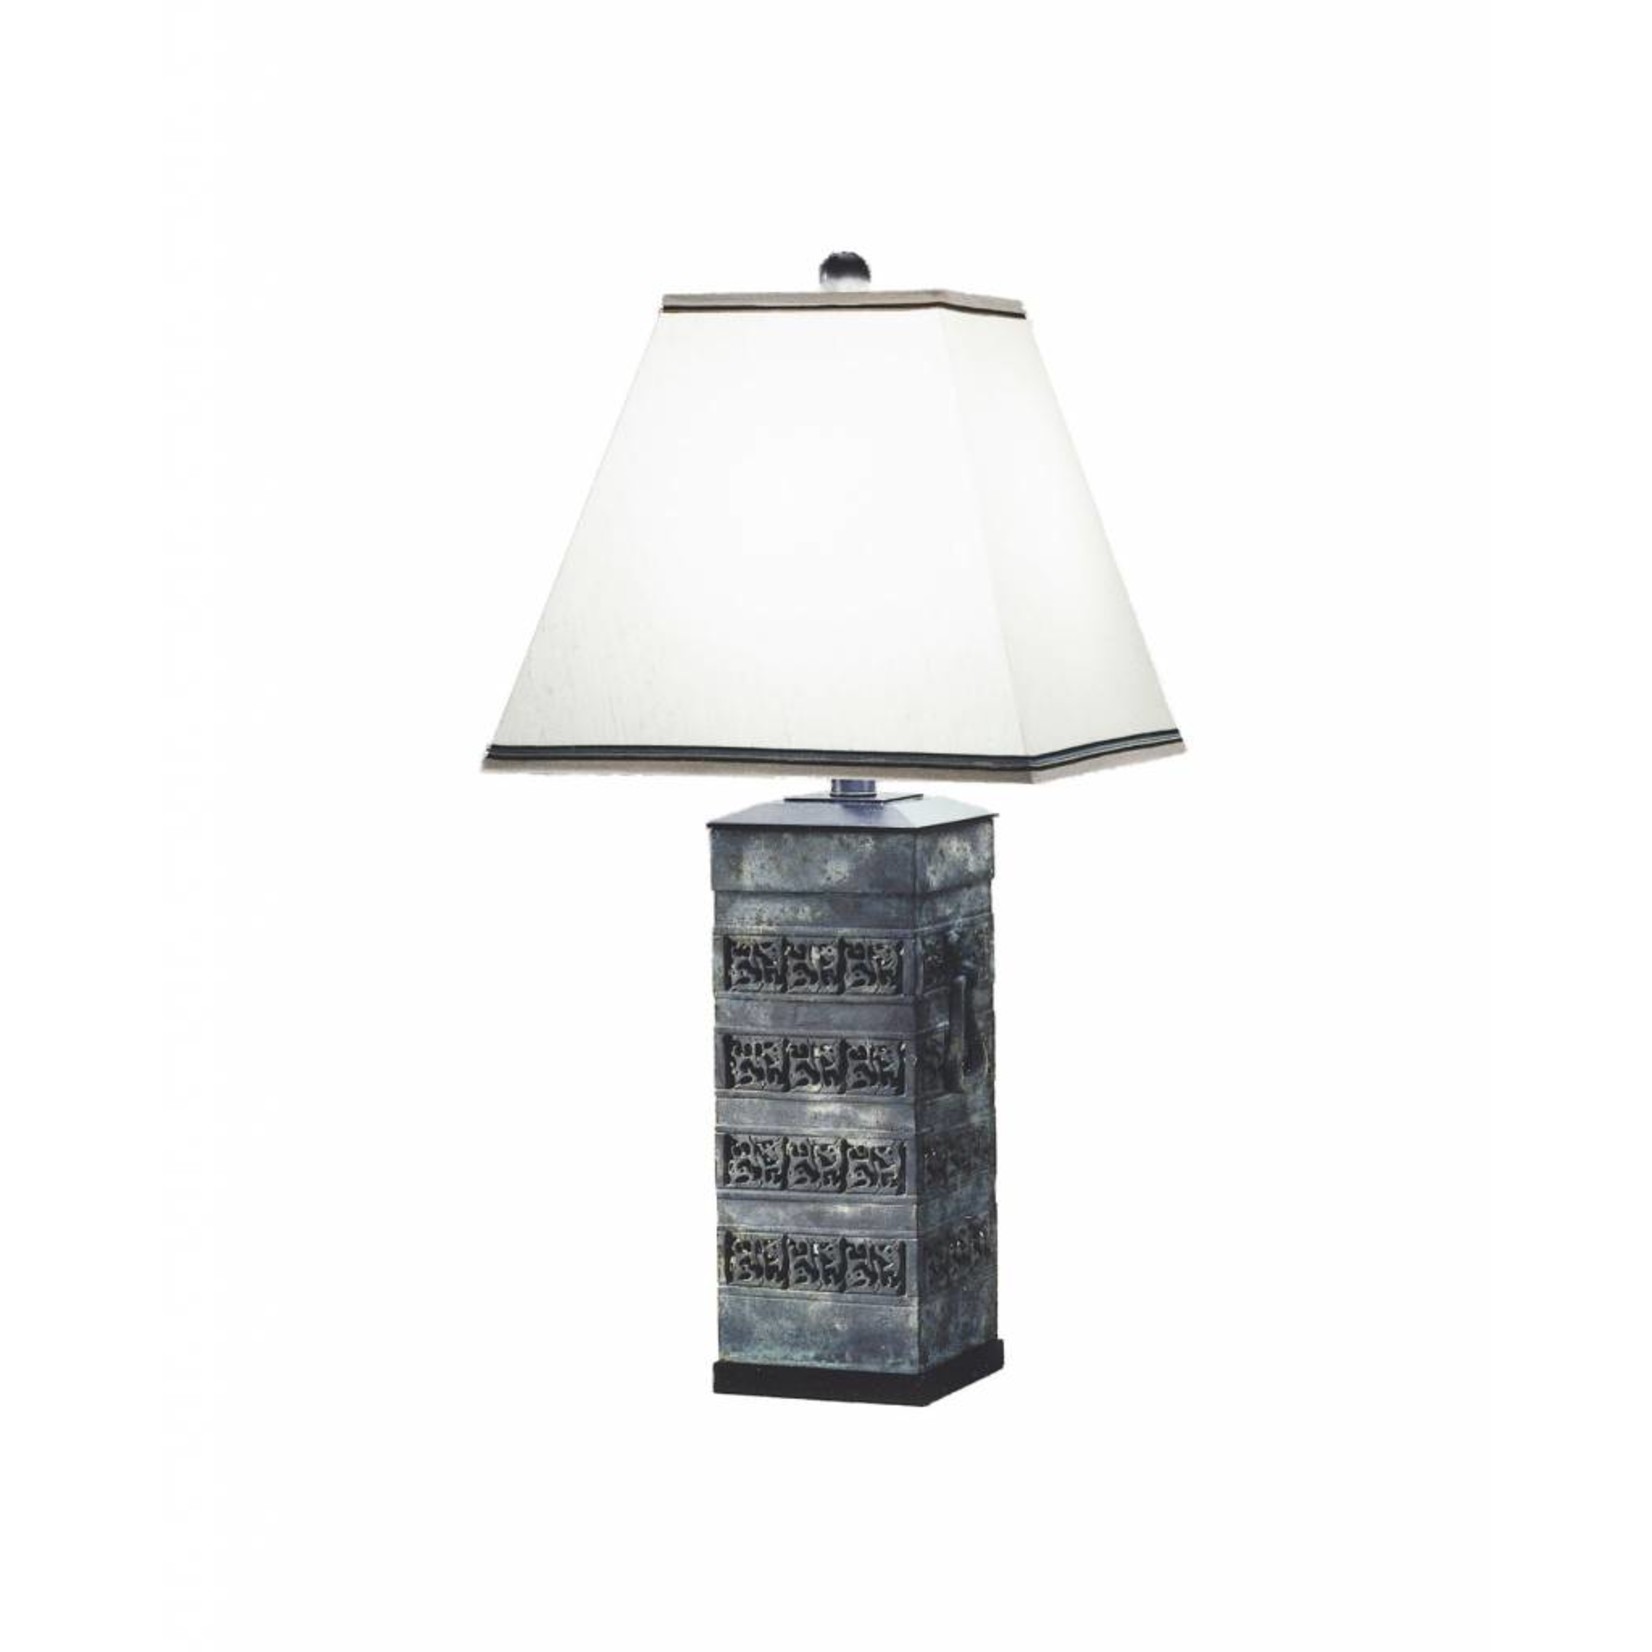 Lawrence & Scott Cleo Table Lamp in Archaic Bronze